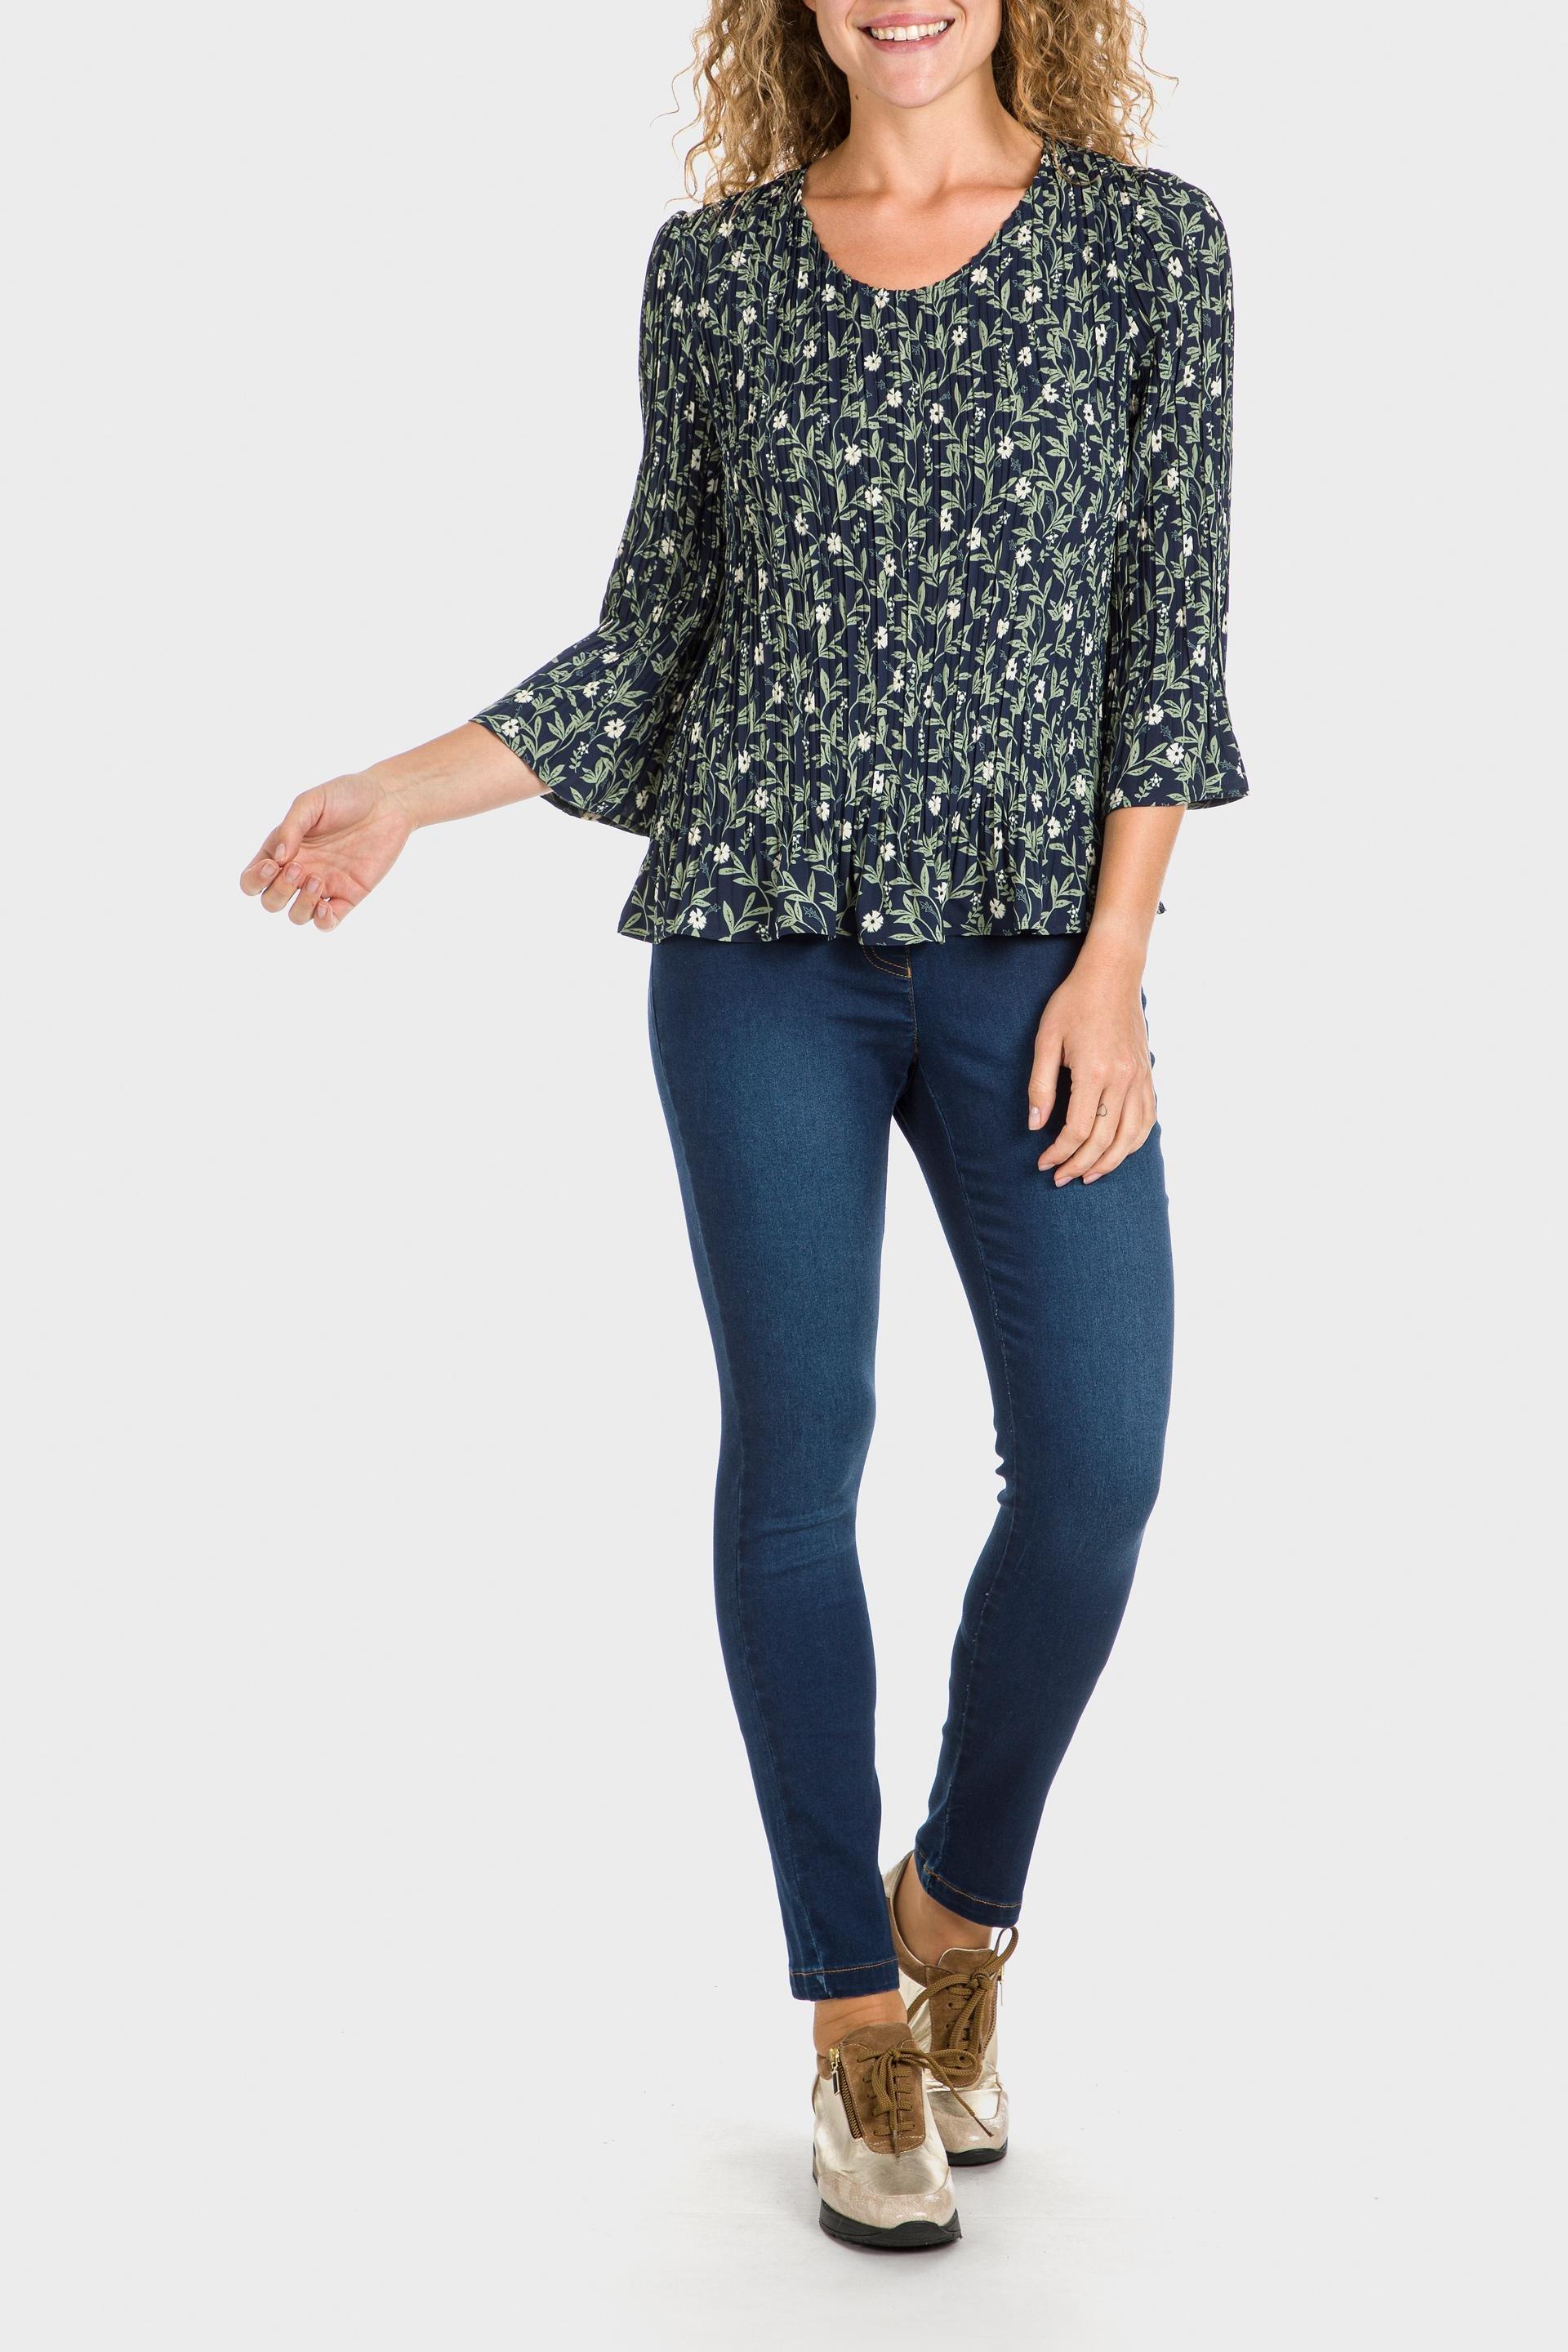 Punt Roma - Navy Floral Blouse